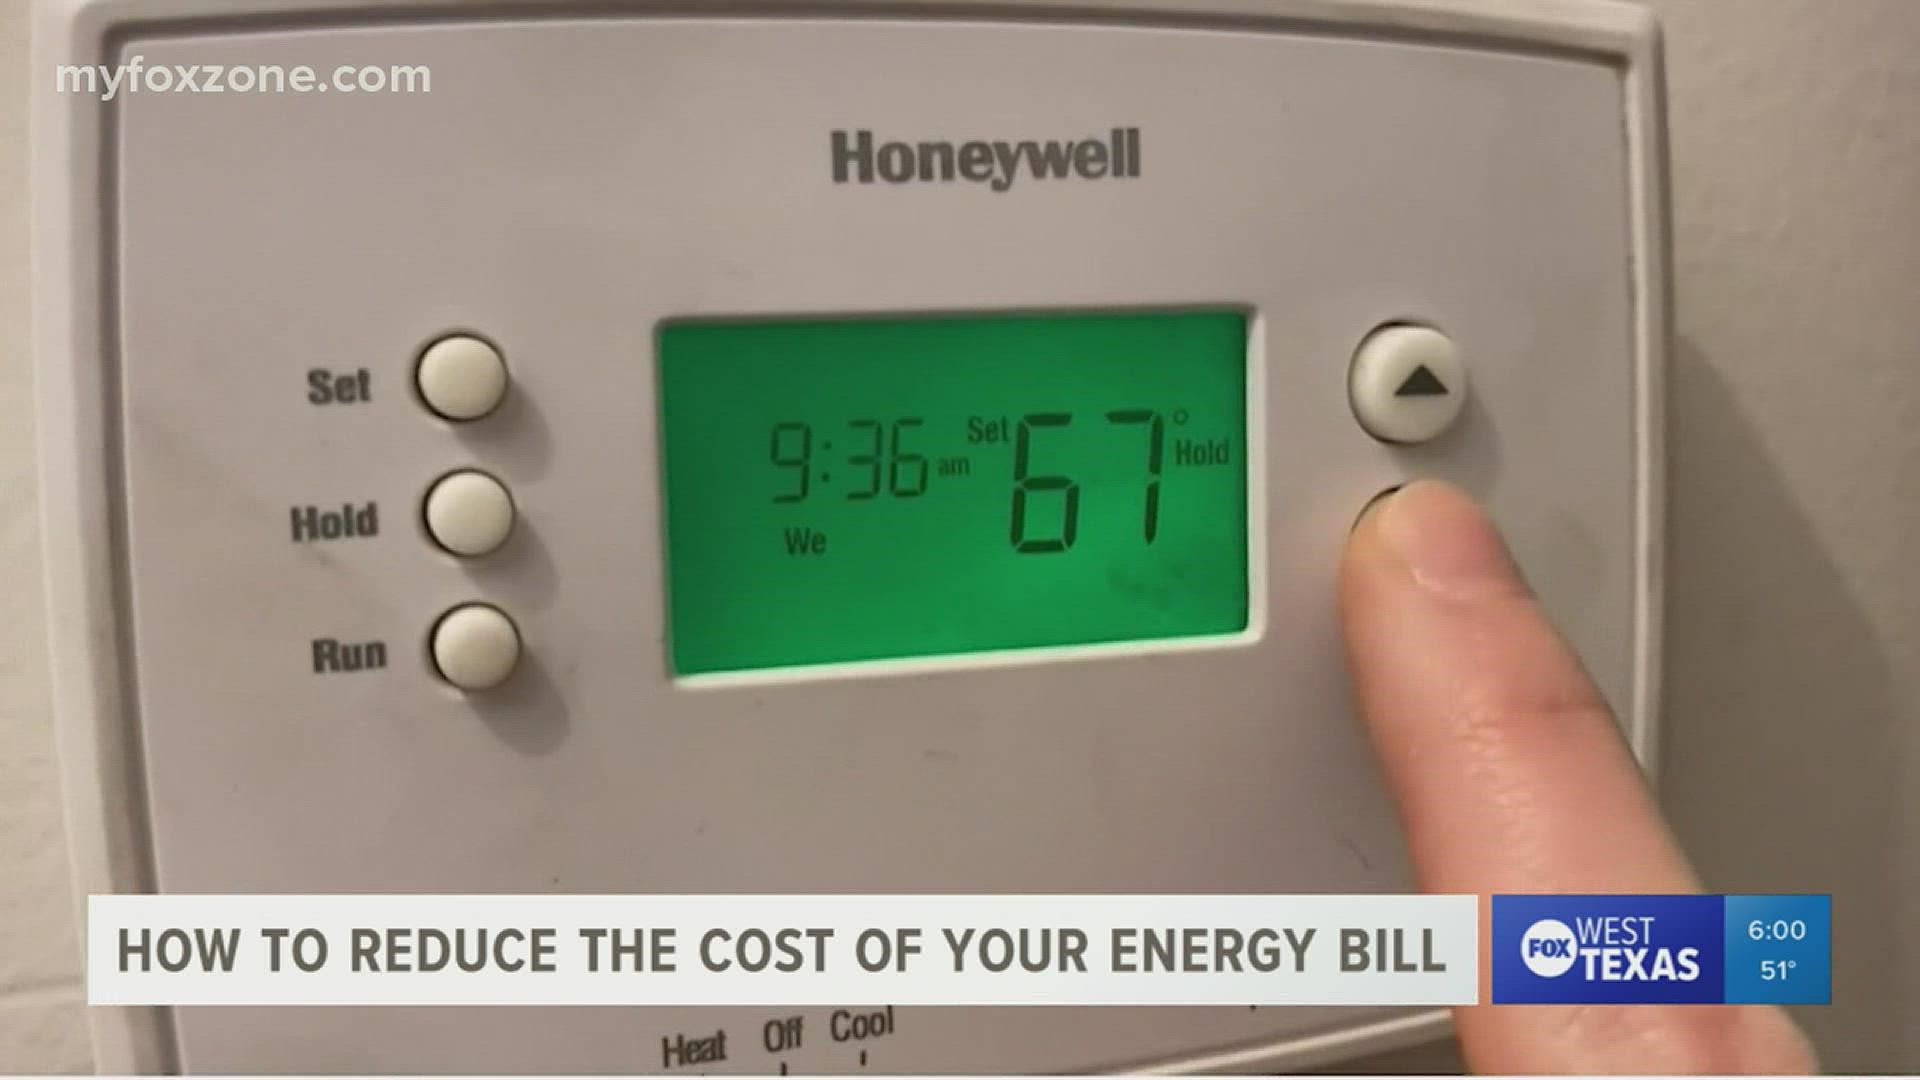 Electric companies shared tips on how to reduce the cost of your electric bill during cold days.